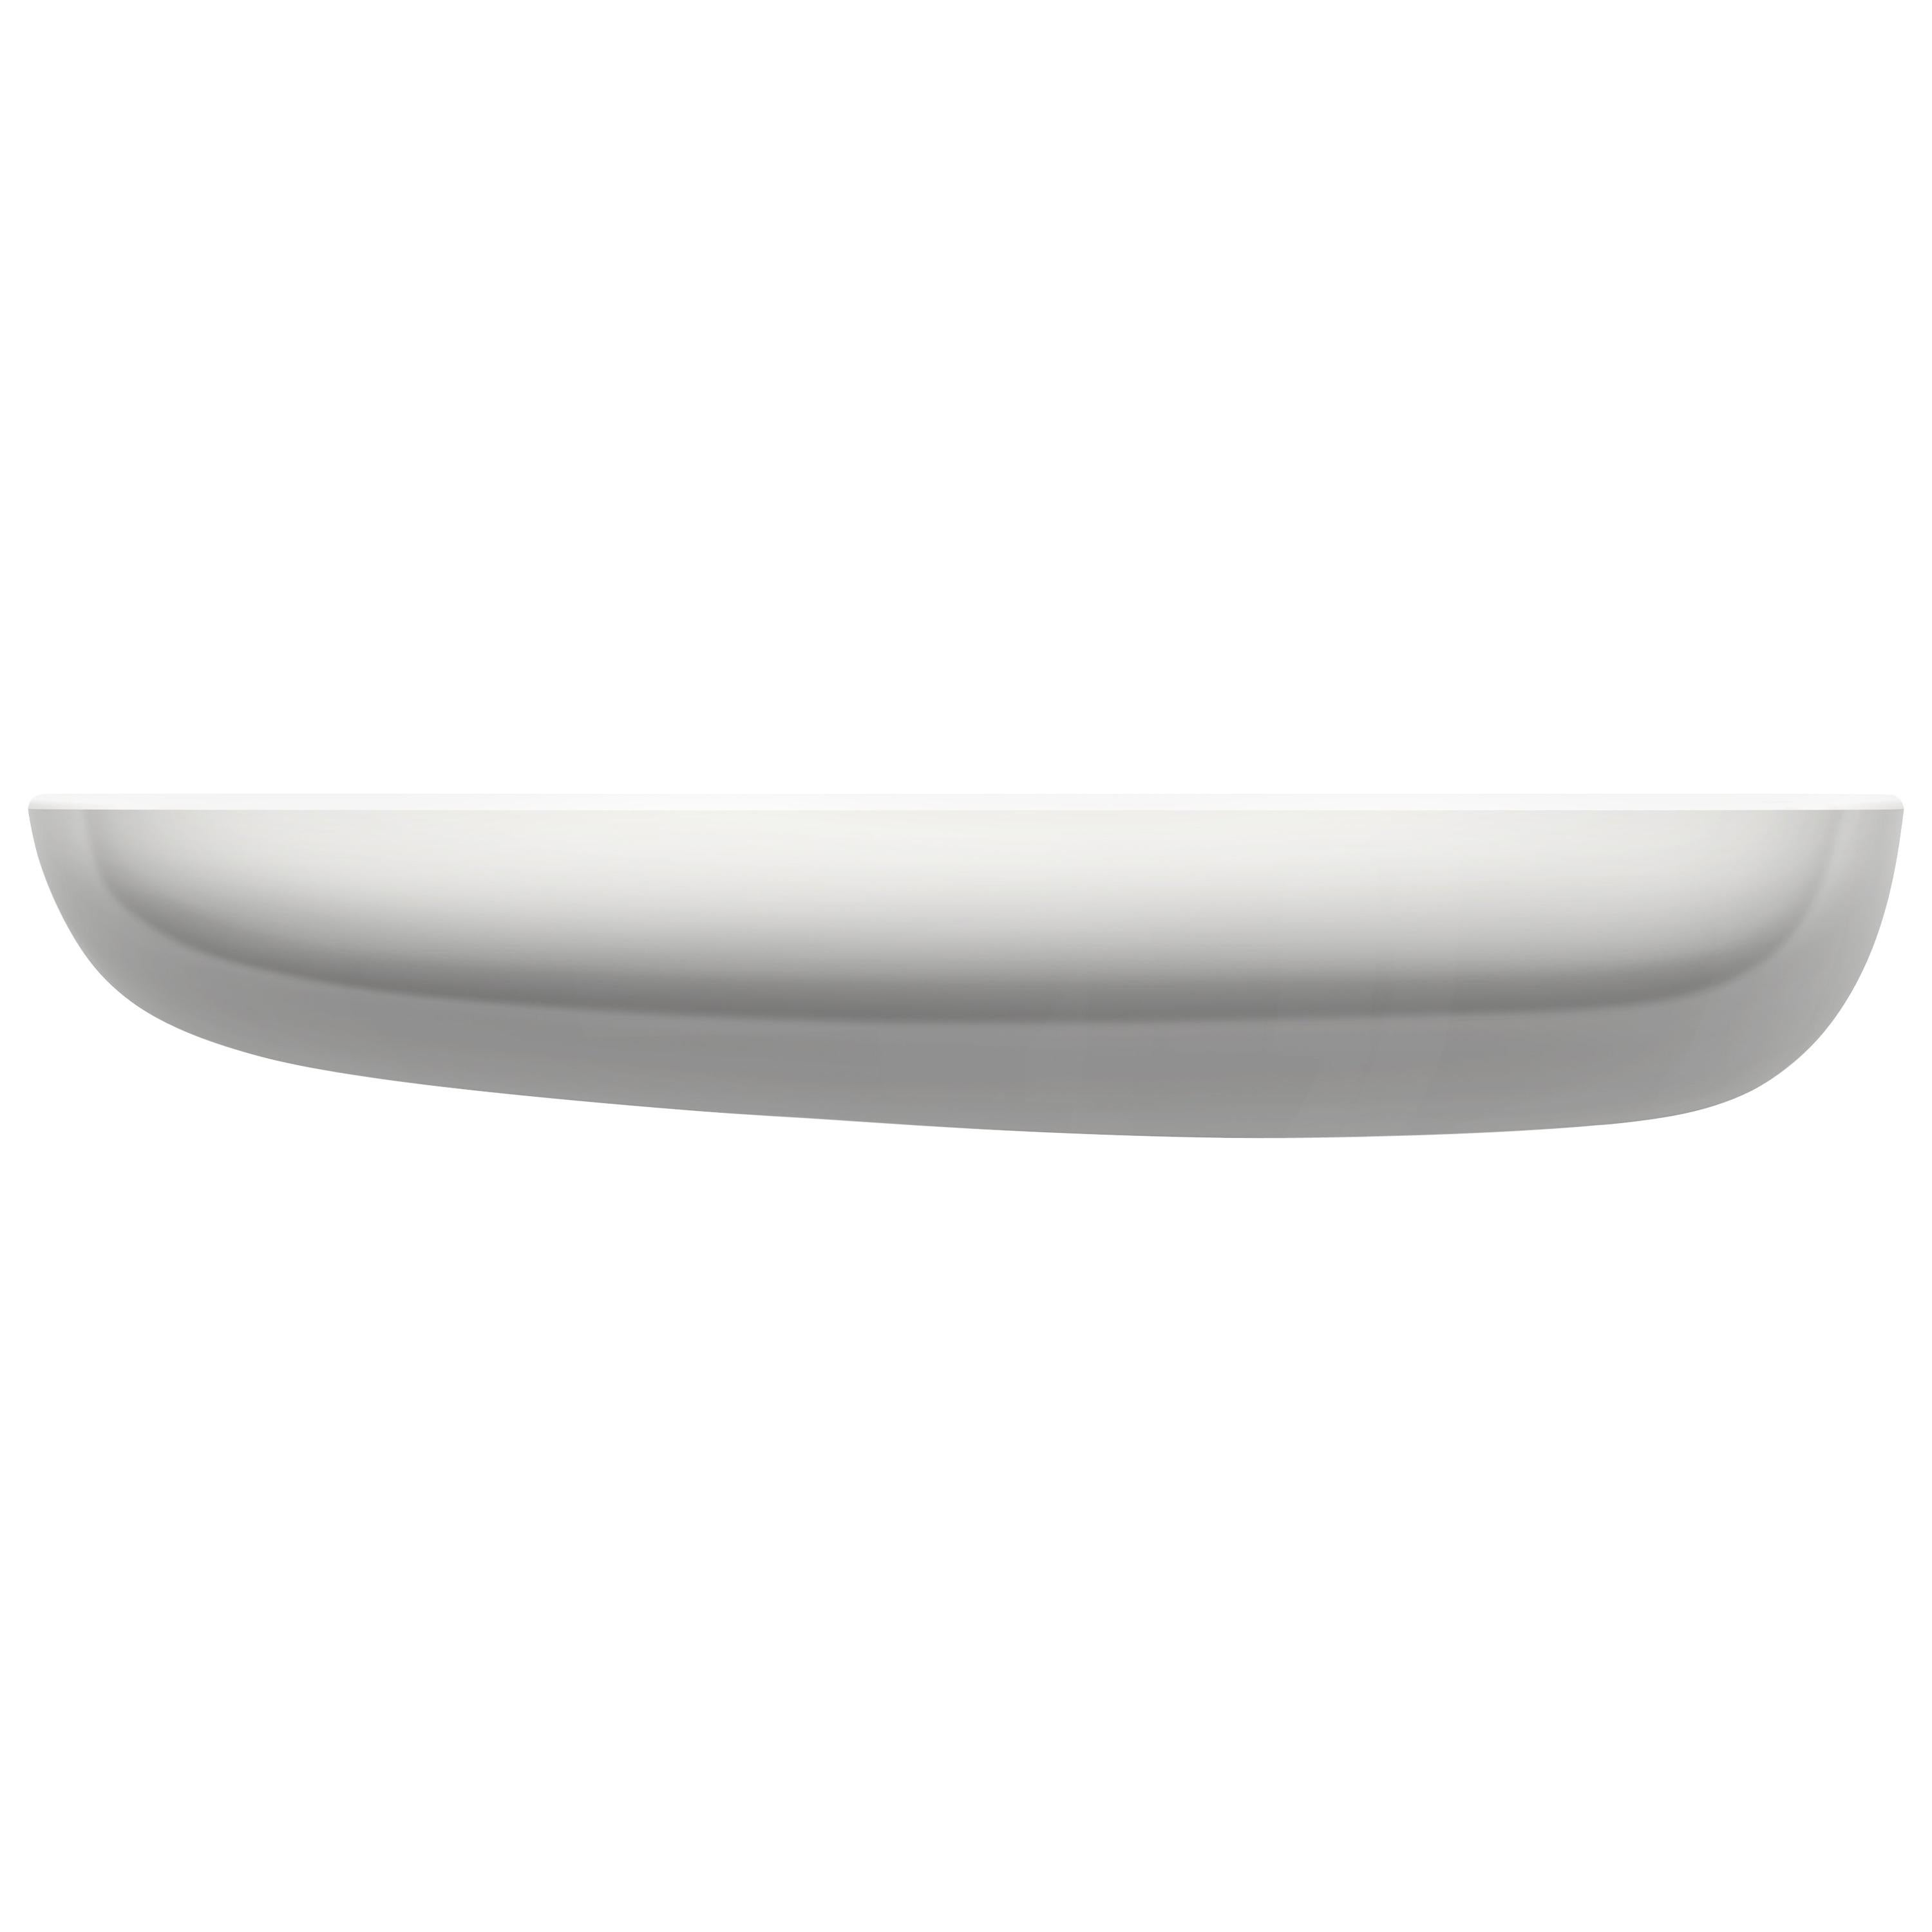 Vitra Large Corniches in White by Ronan & Erwan Bouroullec im Angebot